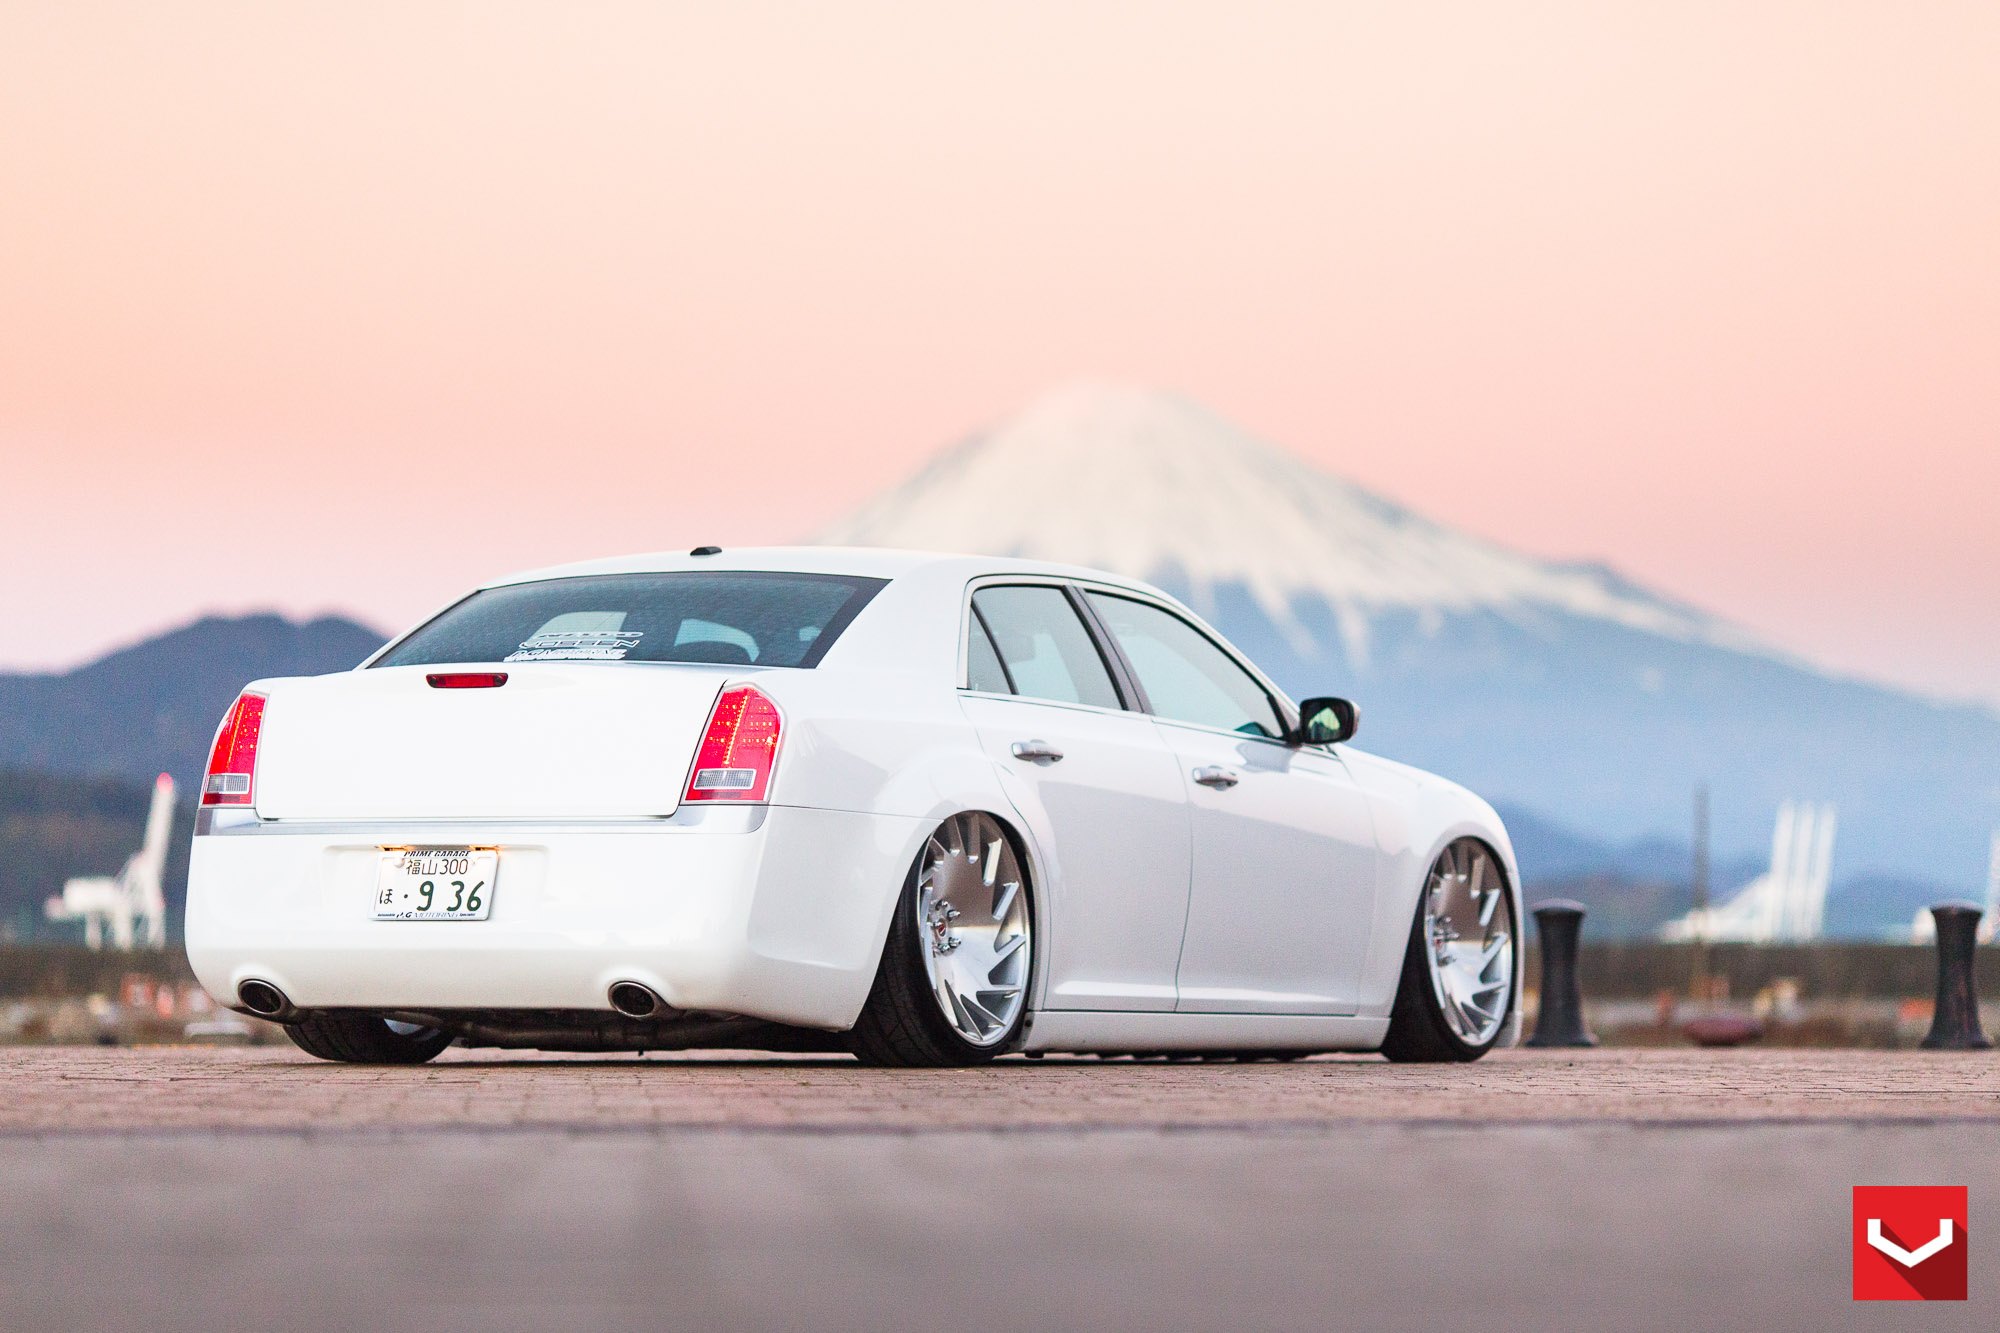 Aftermarket Red LED Taillights on White Chrysler 300 - Photo by Vossen